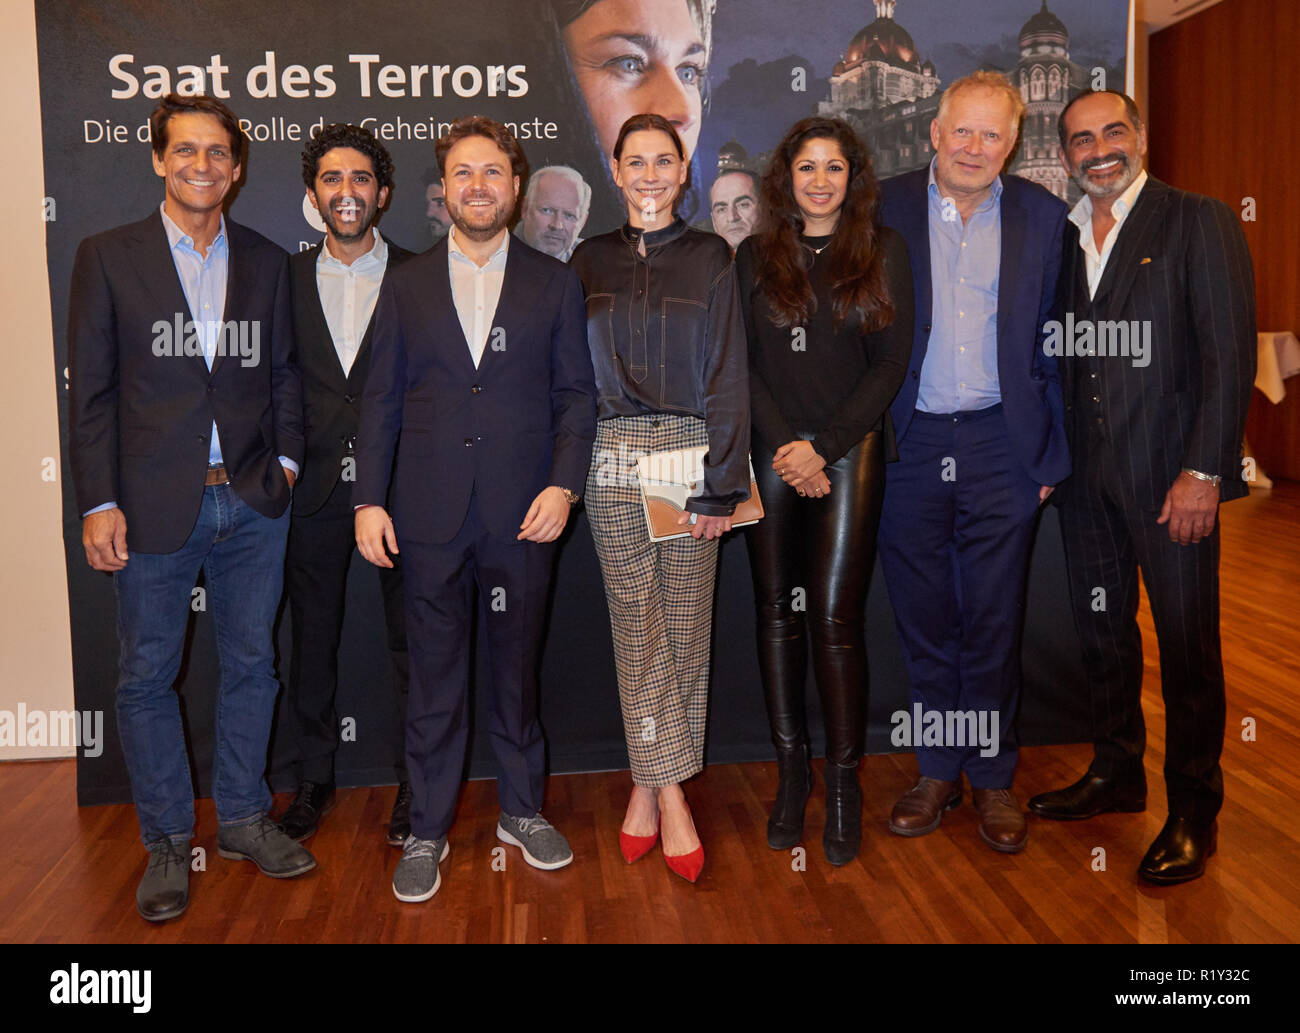 Berlin, Germany. 14th Nov, 2018. Robert Seeliger, actor, Reza Brojerdi, actor, Daniel Harrich, director, Christiane Paul, actress, Ankita Makwana, actress, Axel Milberg actor, Navid Negahban, actor (l-r) at the photocall for the 'Preview aat des Terrors'. Credit: Annette Riedl/dpa/Alamy Live News Stock Photo